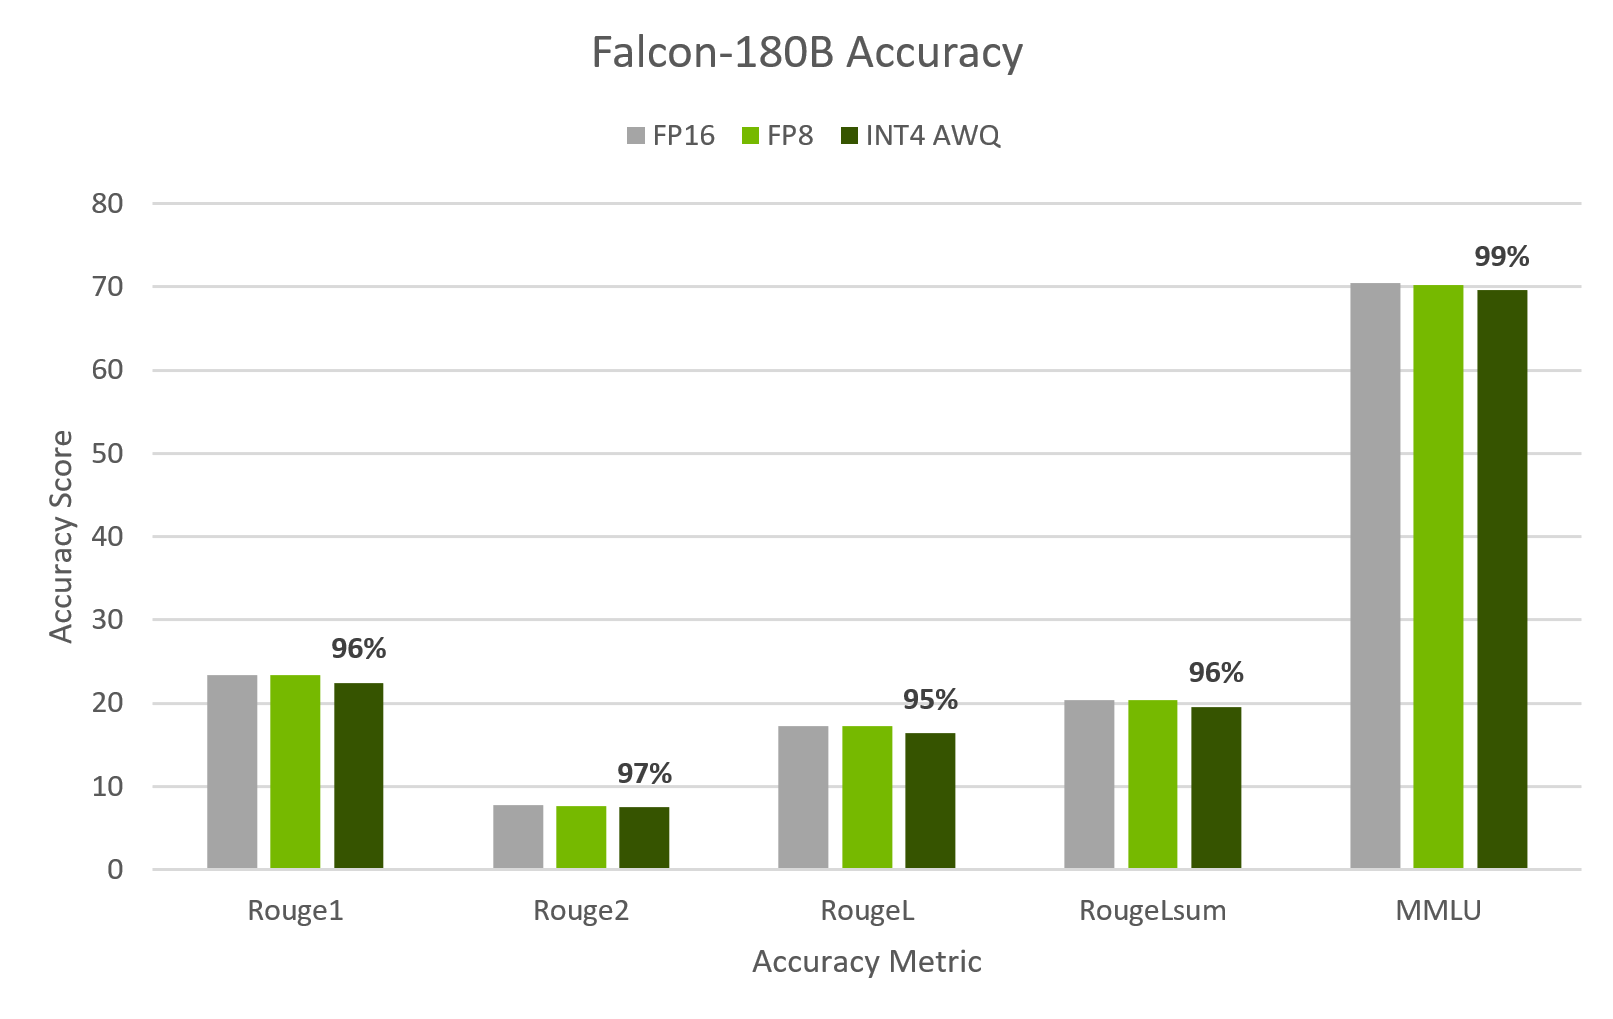 A chart showing the accuracy scores on Falcon-180B at FP16, FP8, and INT4 AWQ, across the following accuracy metrics: Rogue1, Rogue2, RogueL, RogueLsum, and MMLU. 